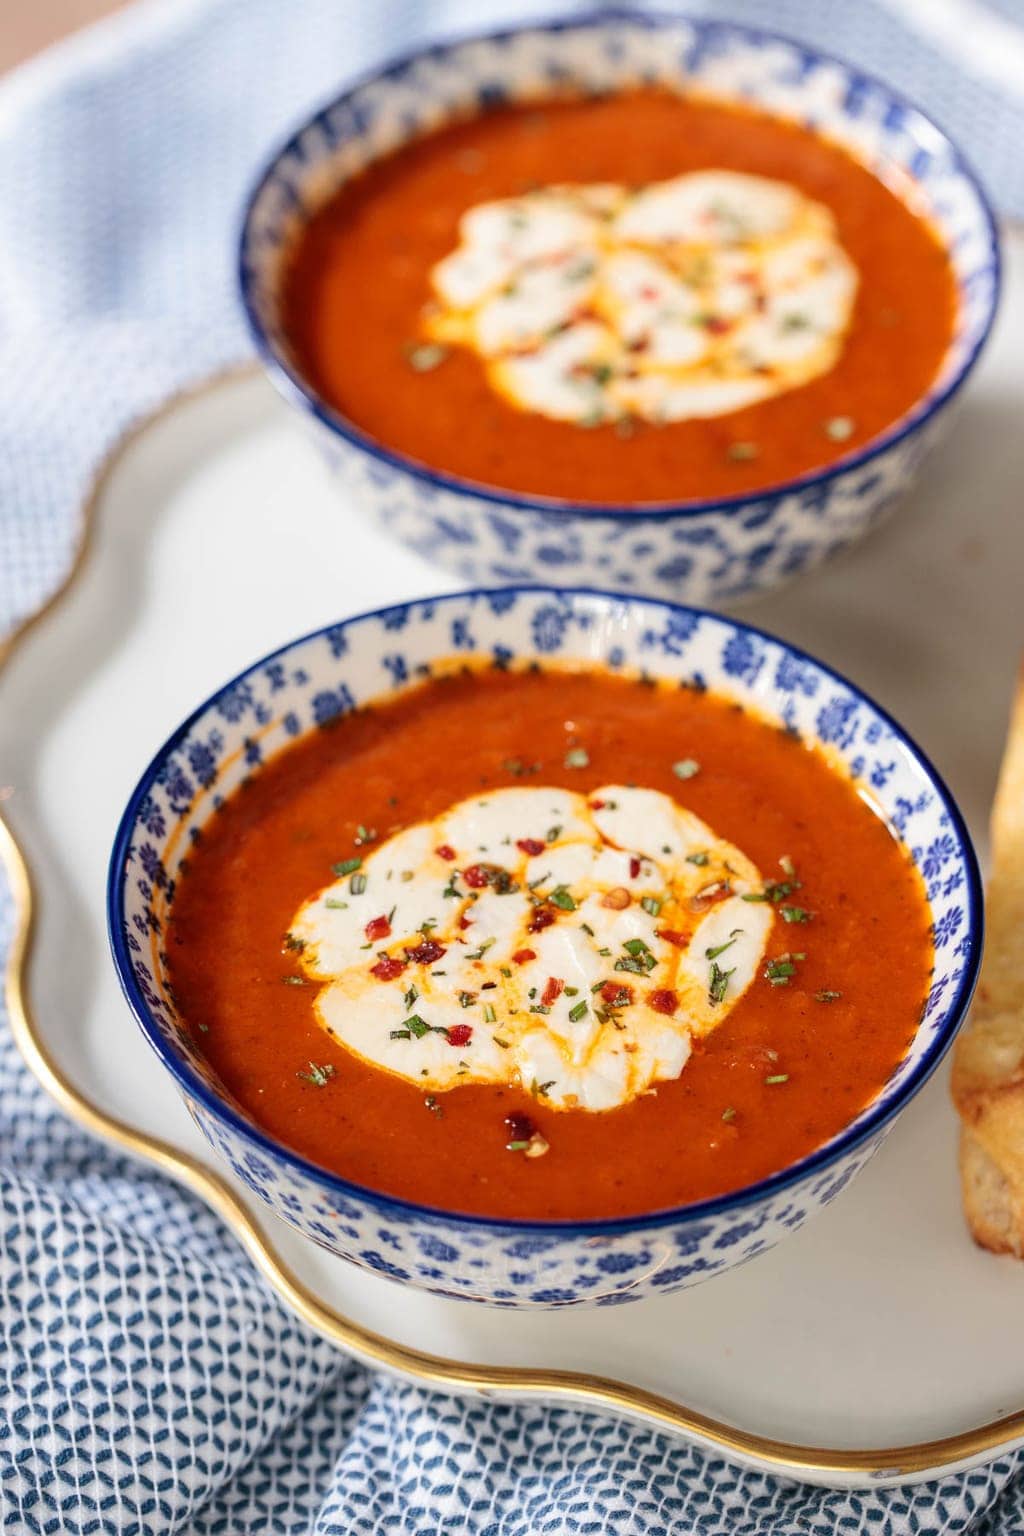 Vertical photo of Roasted Red Pepper Tomato Soup topped with melted mozzarella cheese in blue and white patterned bowls.